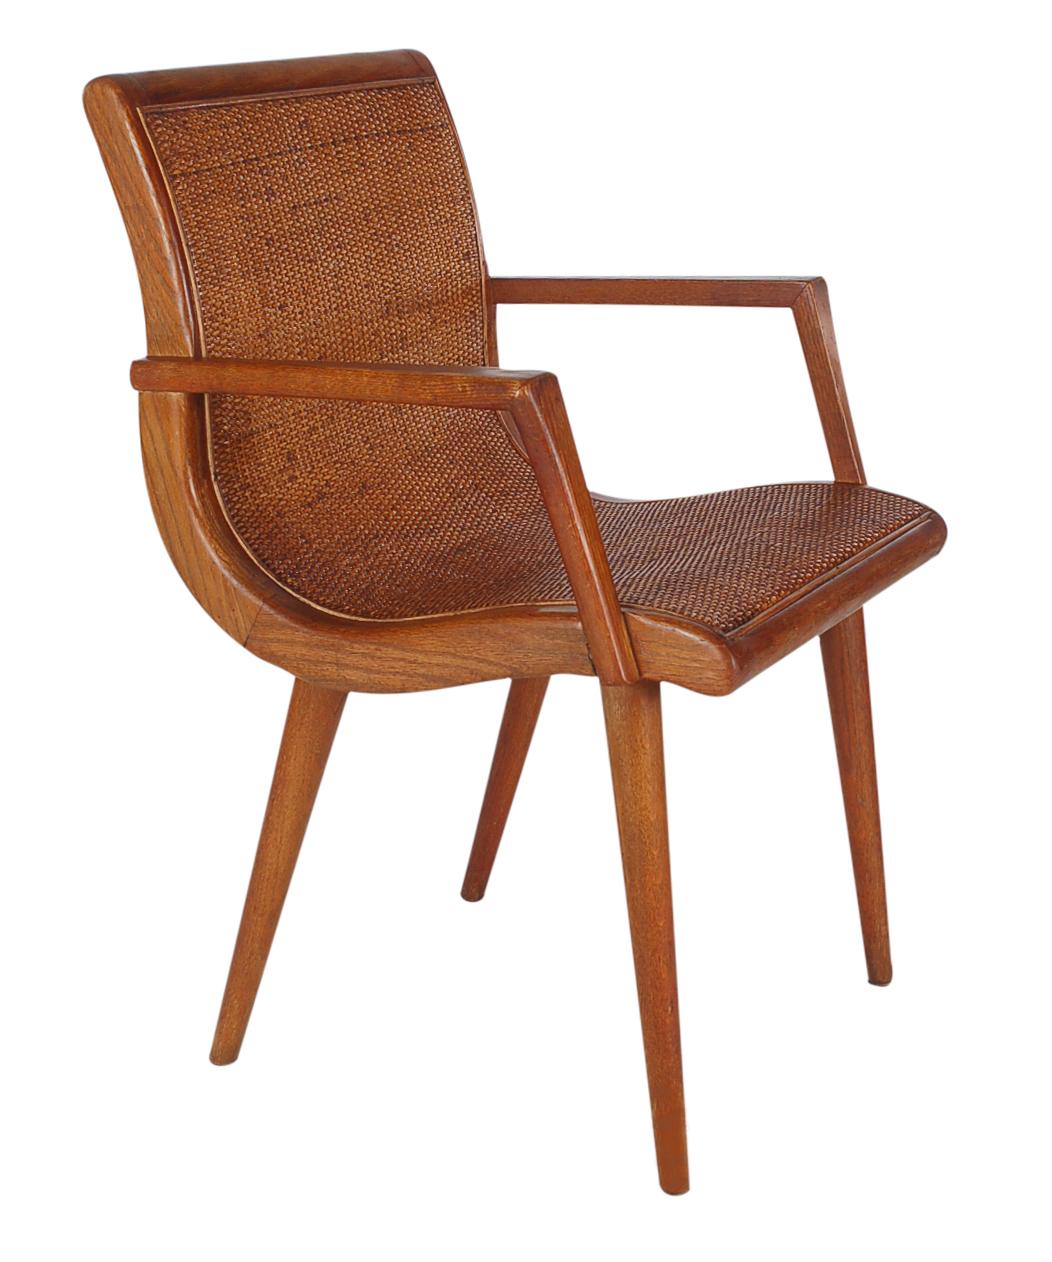 Mid-20th Century Mid-Century Modern Cane and Oak Danish Modern Style Armchair or Side Chair